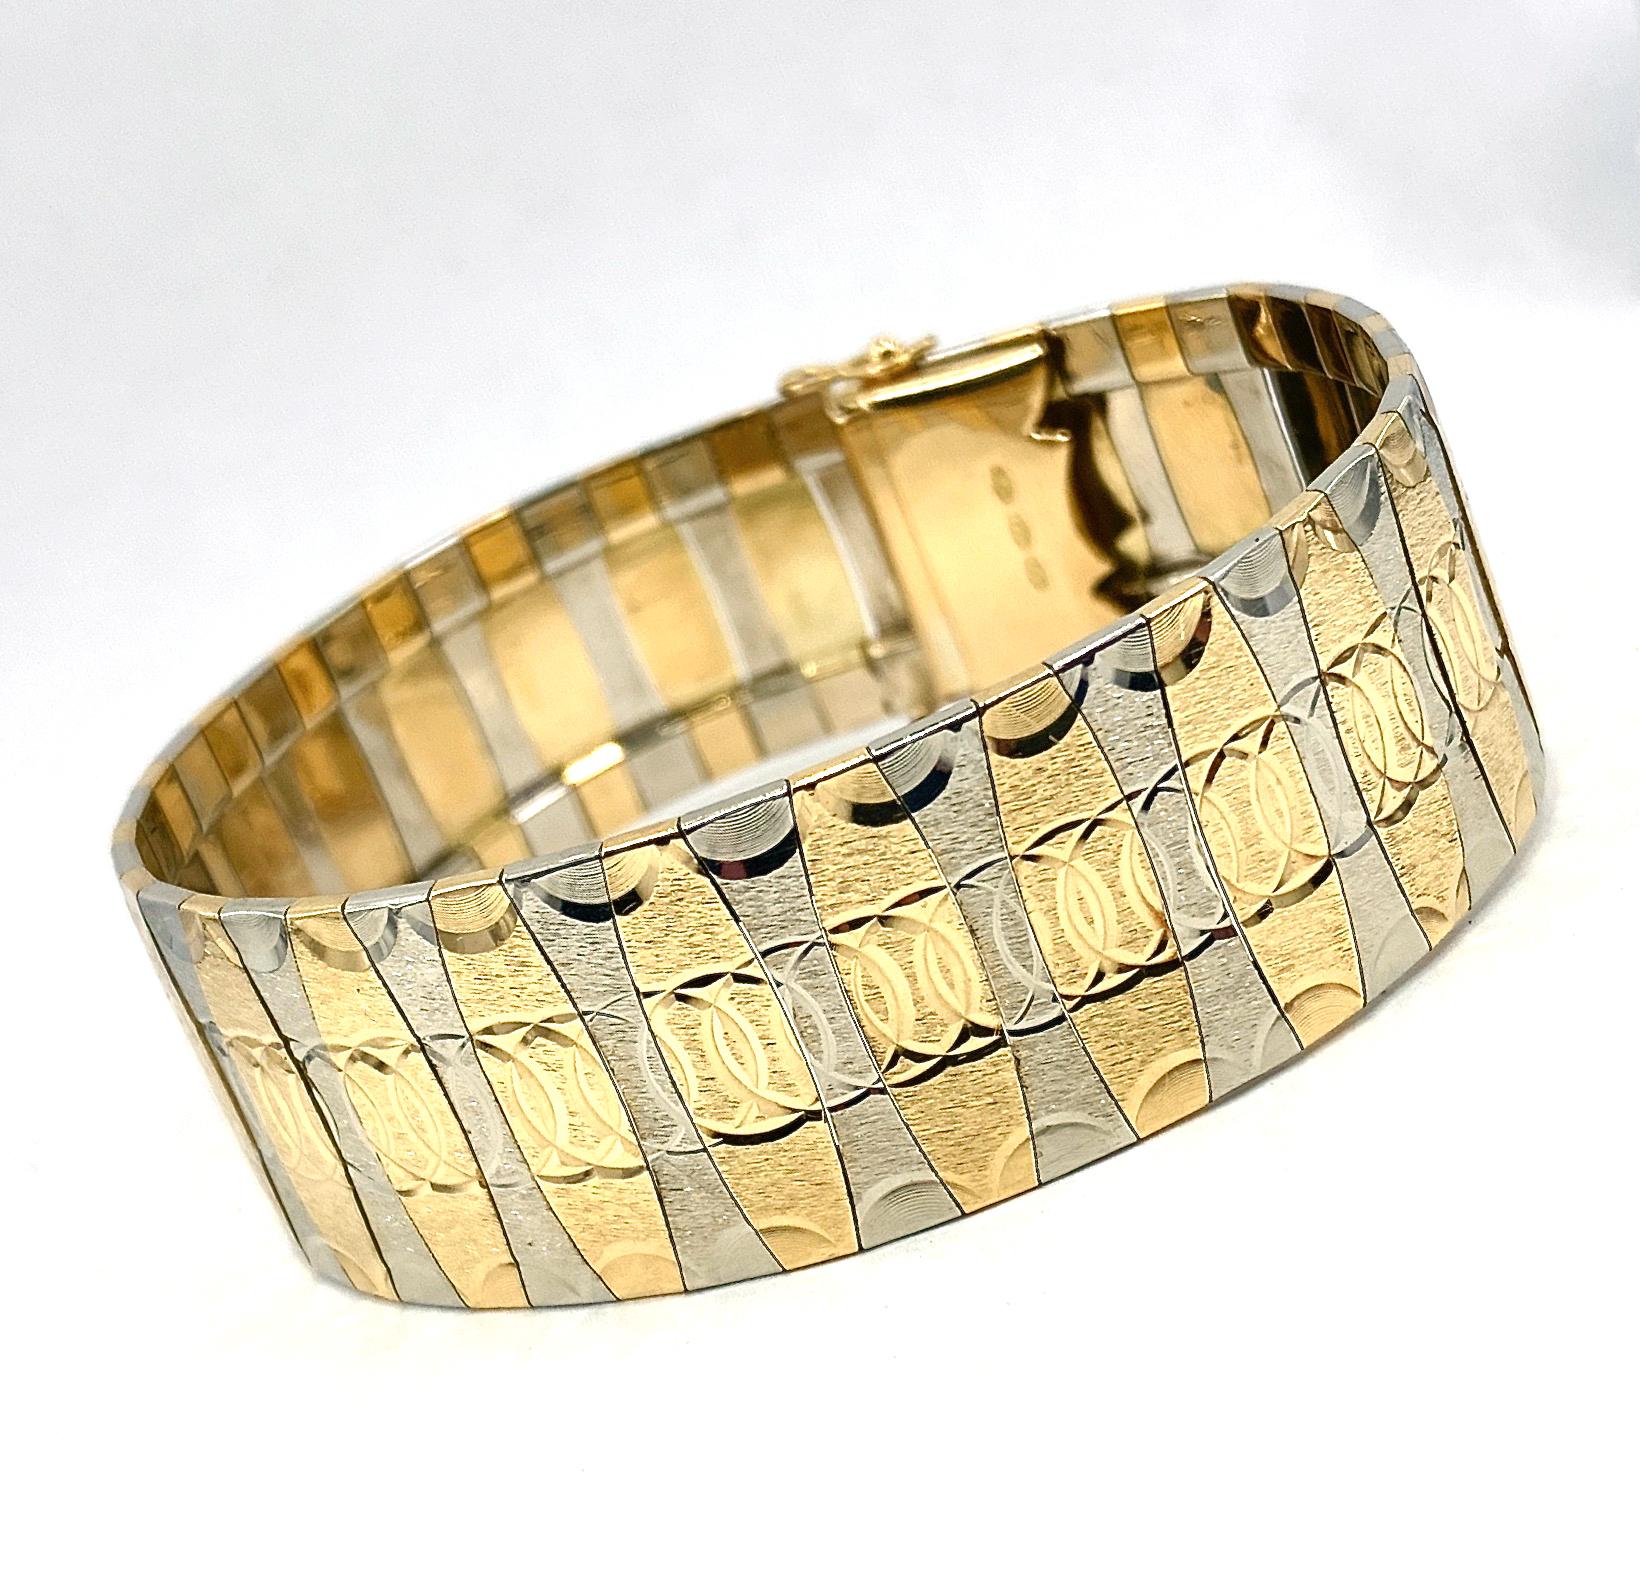 This beautifully made Italian bracelet features 18 karat yellow and white gold panels with a continuous diamond-cut pattern of interlocking circles.  The circle motif continues along the  scalloped, high-polish edges.  

CLOSURE:  A tidy box clasp